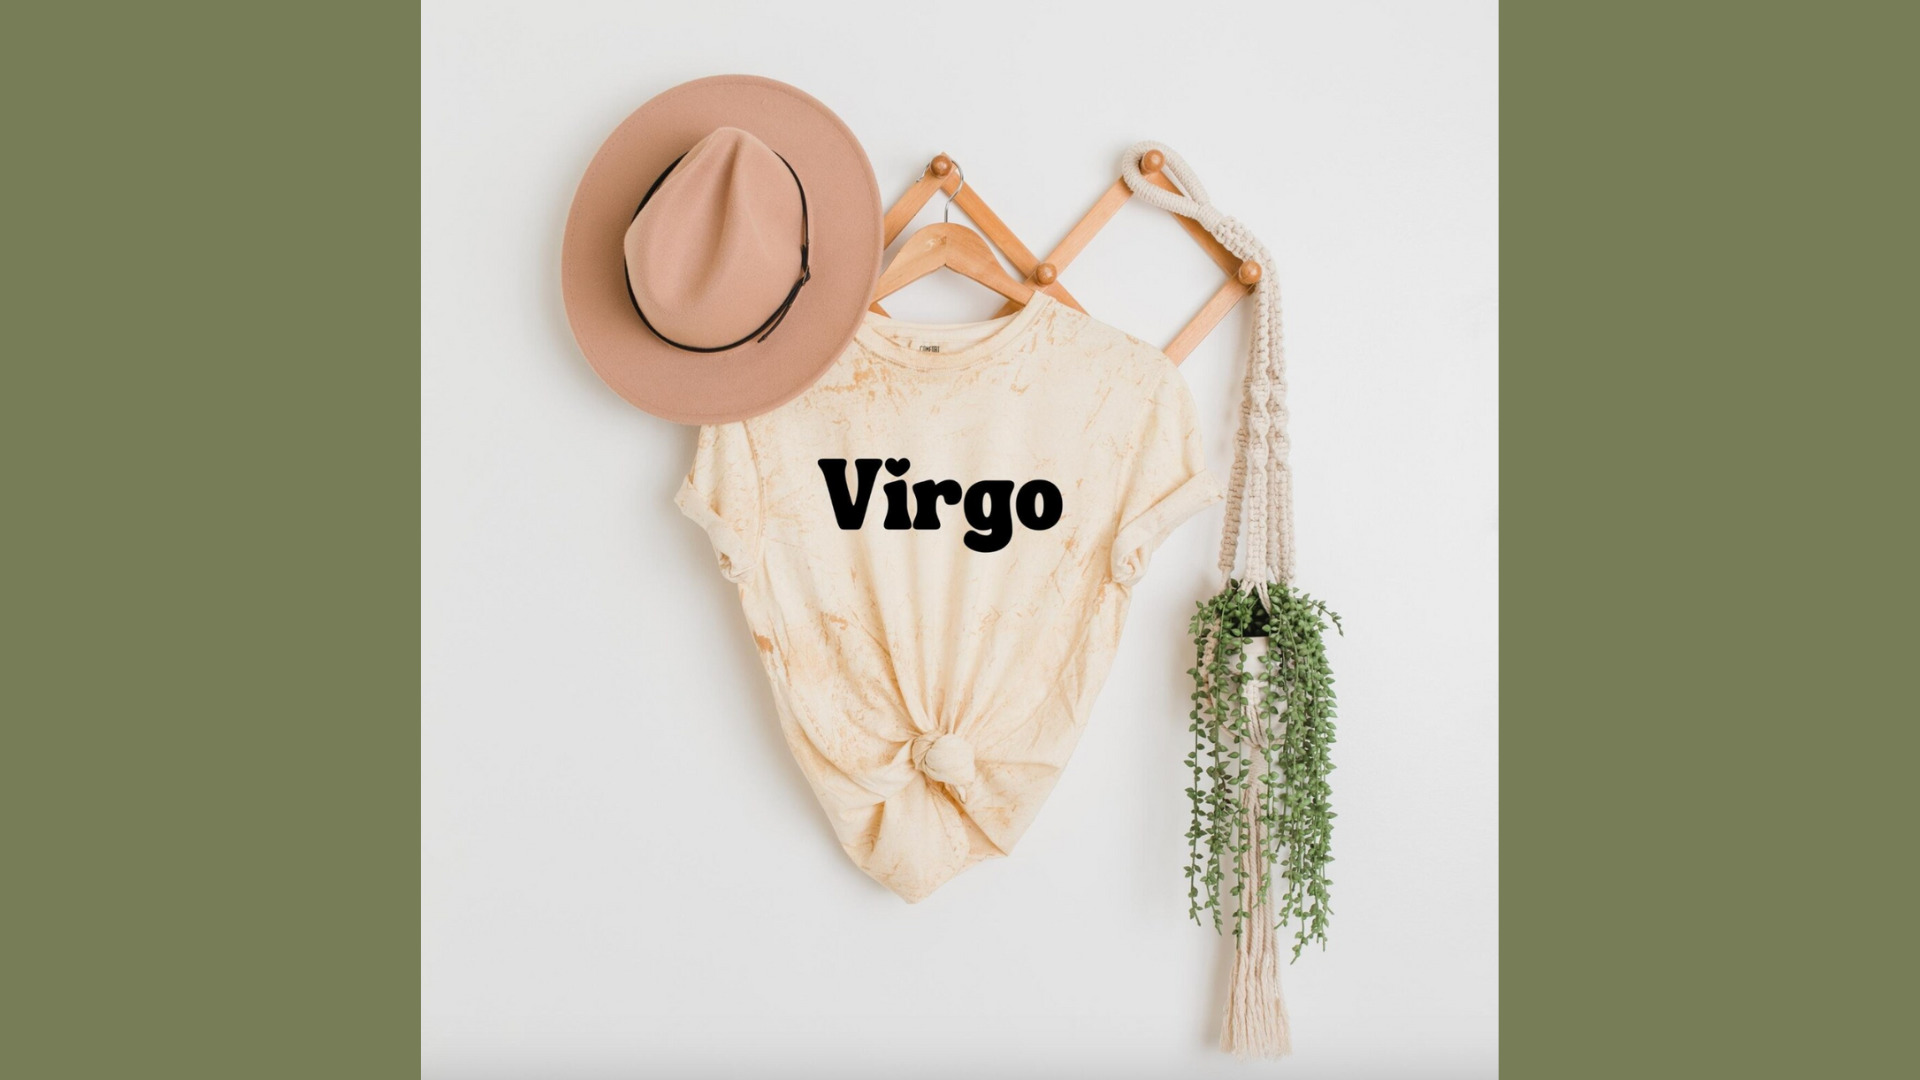 Tshirt that says Virgo with a hat and small plant